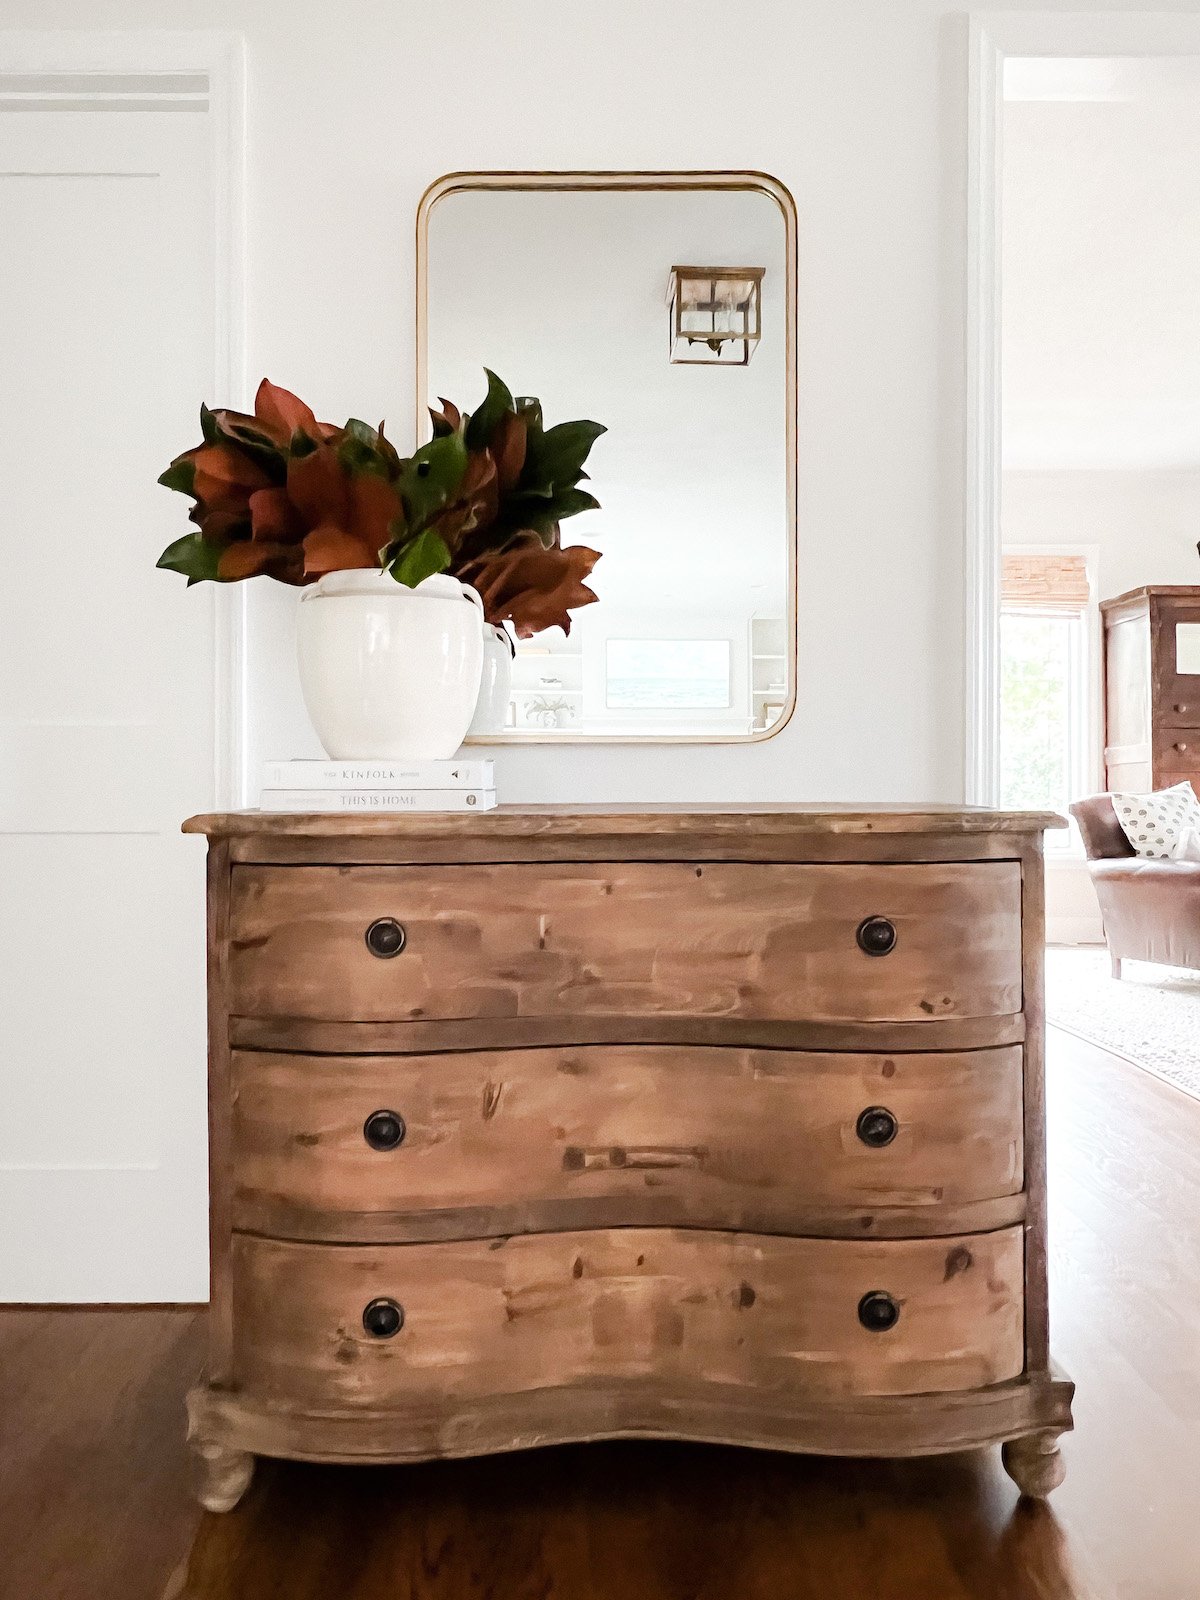 A wooden dresser with a mirror in the room decorated with fall branches.